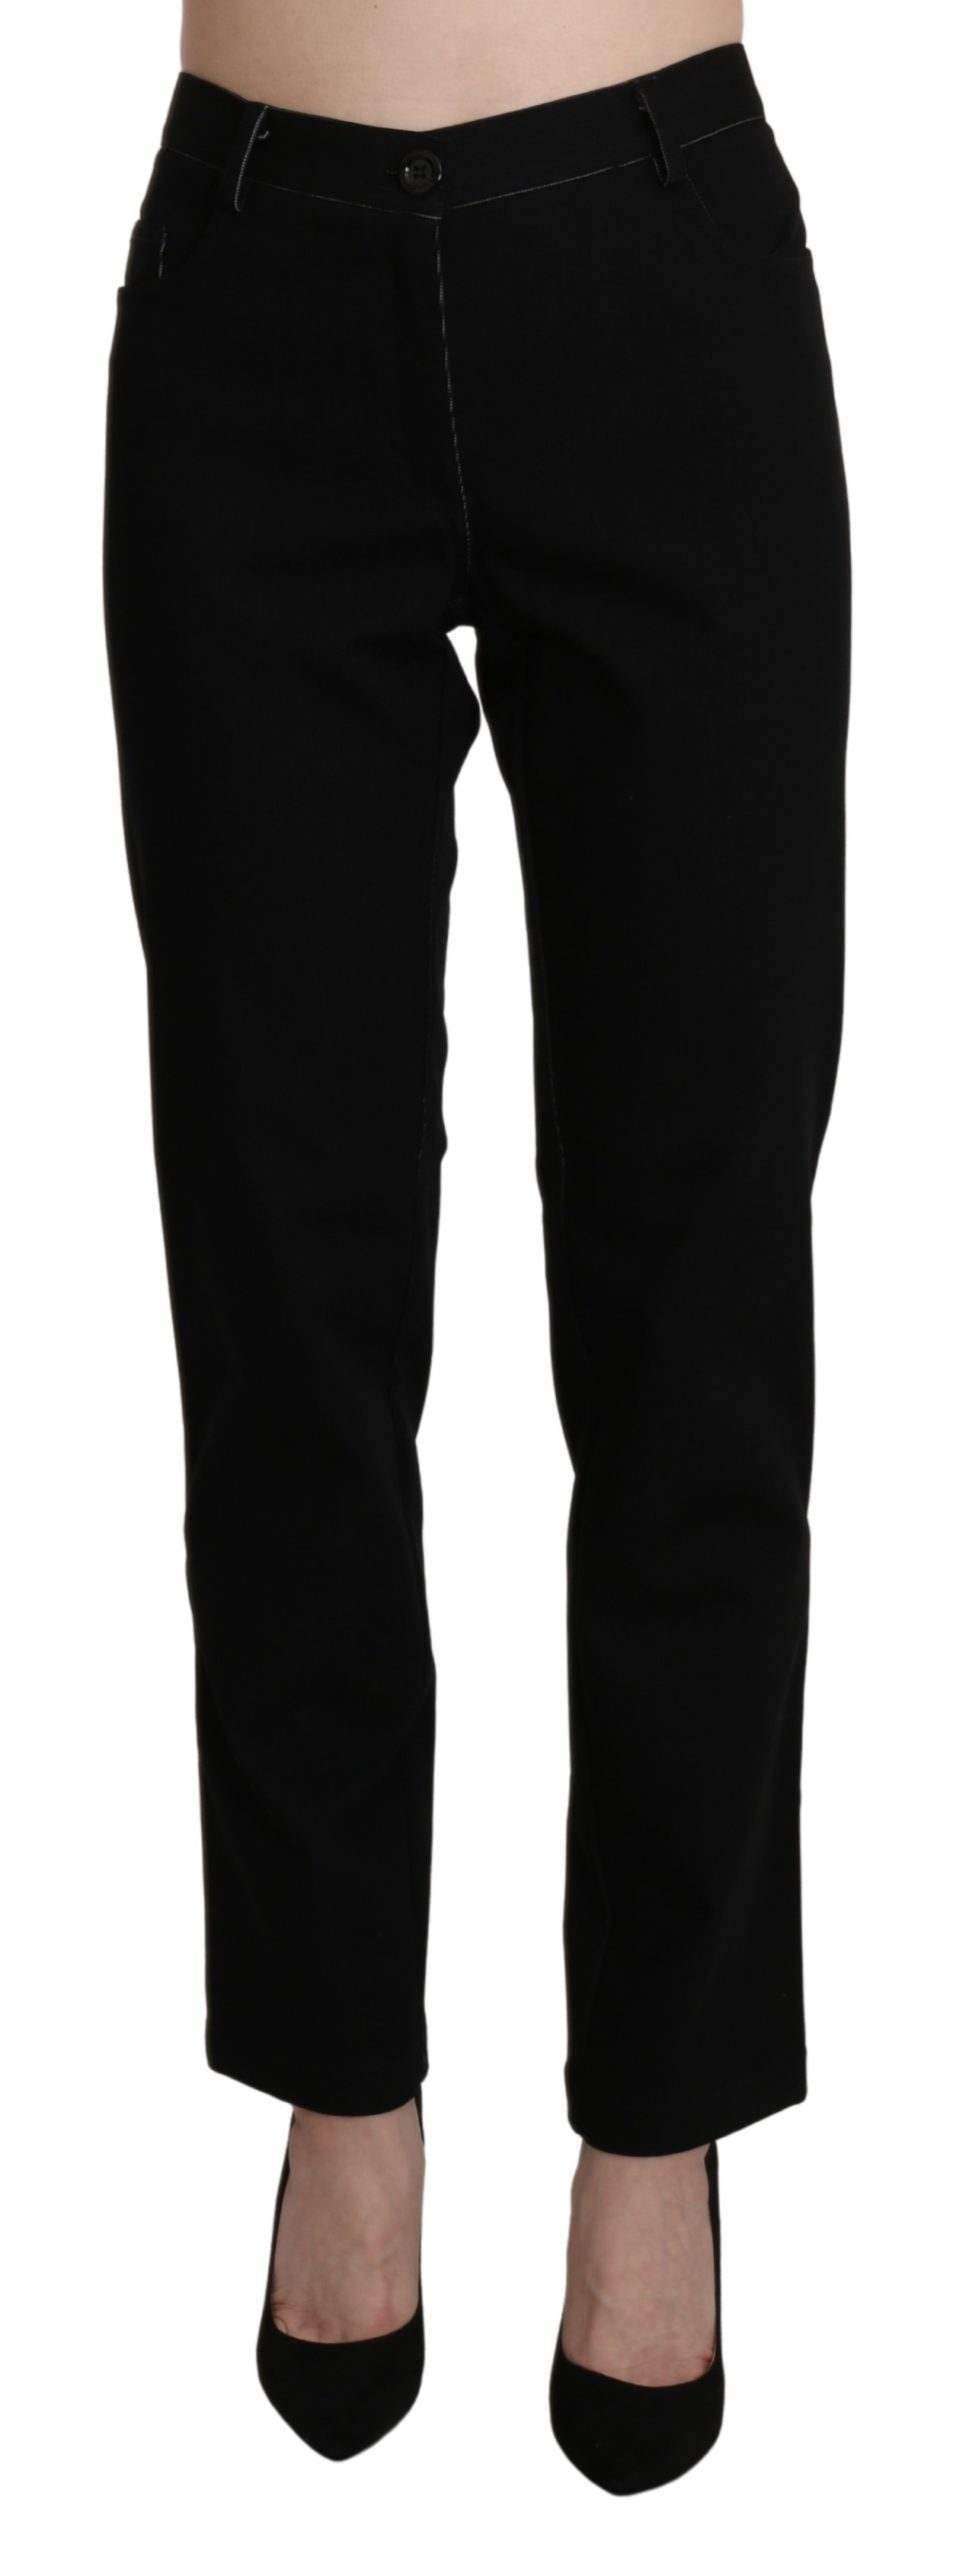 BENCIVENGA  High Waist Straight Casual Trouser Pant #women, BENCIVENGA, Black, feed-agegroup-adult, feed-color-black, feed-gender-female, feed-size-IT46|XL, feed-size-IT48|XXL, feed-size-IT50|3XL, Gender_Women, IT46|XL, IT48|XXL, IT50|3XL, Jeans & Pants - Women - Clothing, Women - New Arrivals at SEYMAYKA